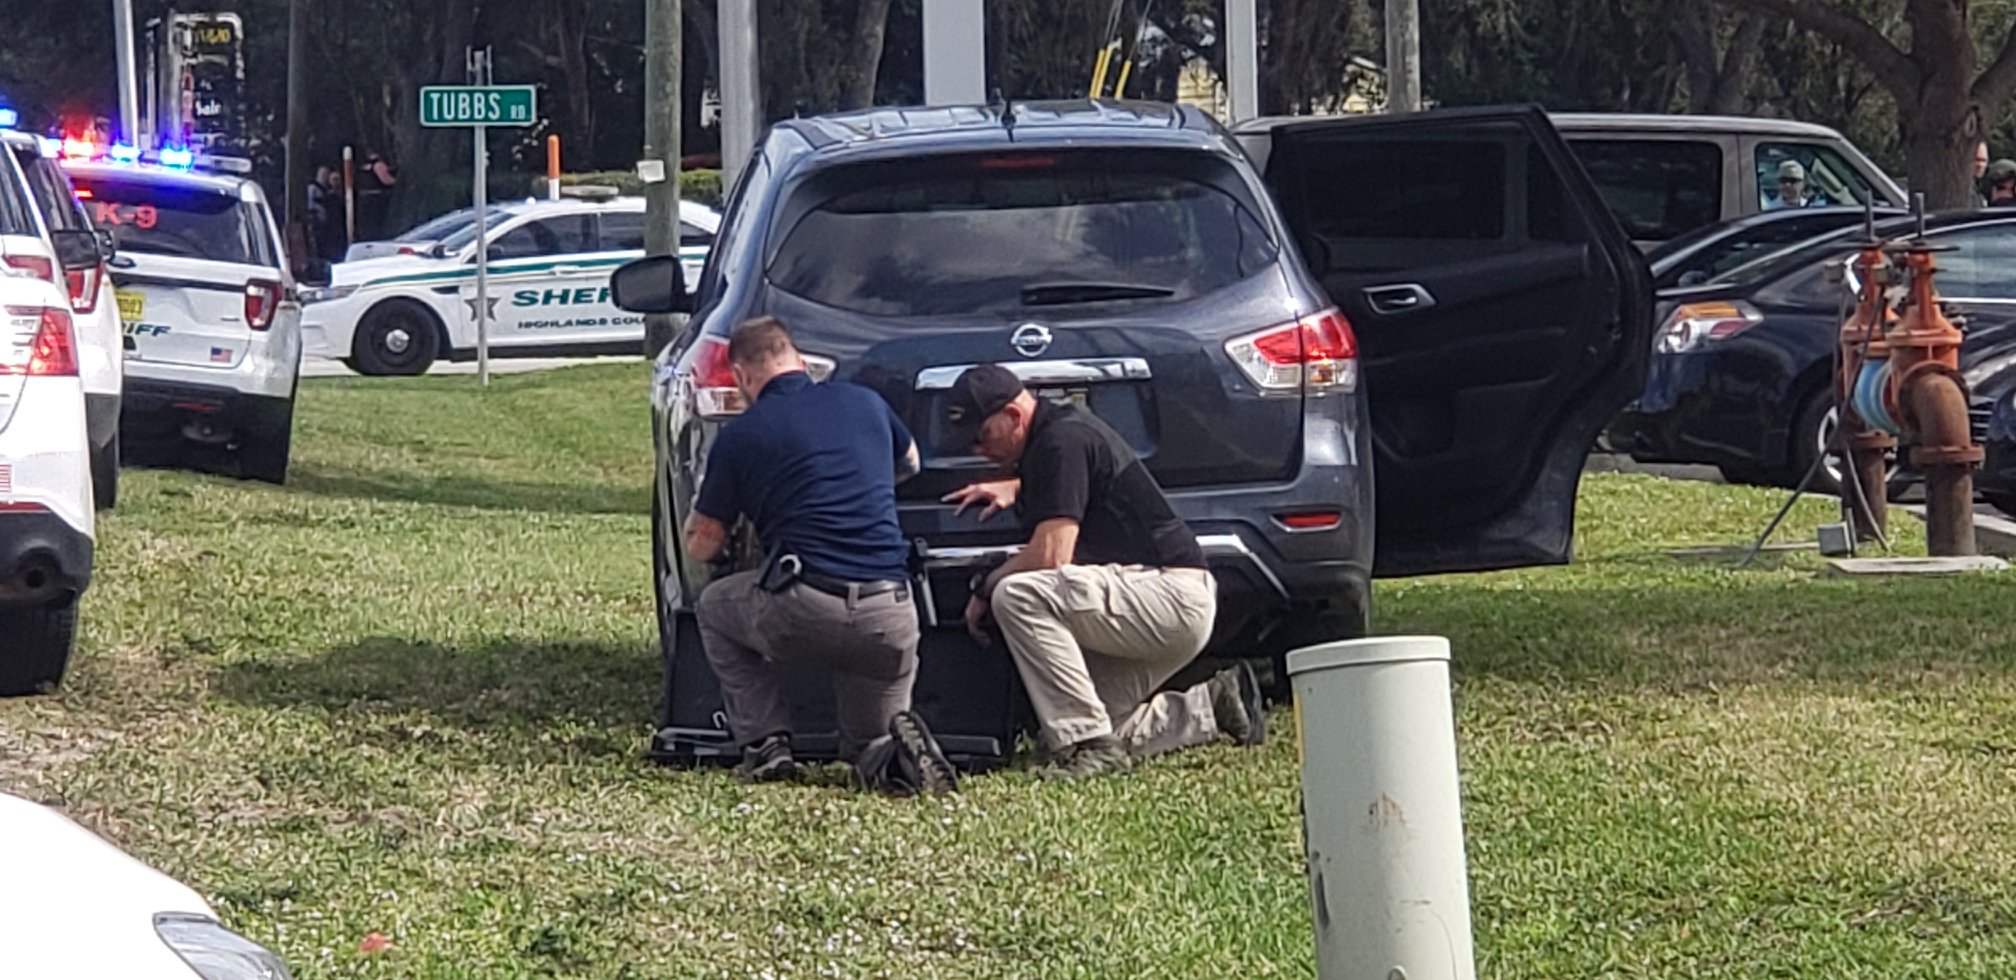 PHOTO: Police respond to the scene of a shooting in a SunTrust bank branch in Sebring, Fla., Jan. 23, 2019.